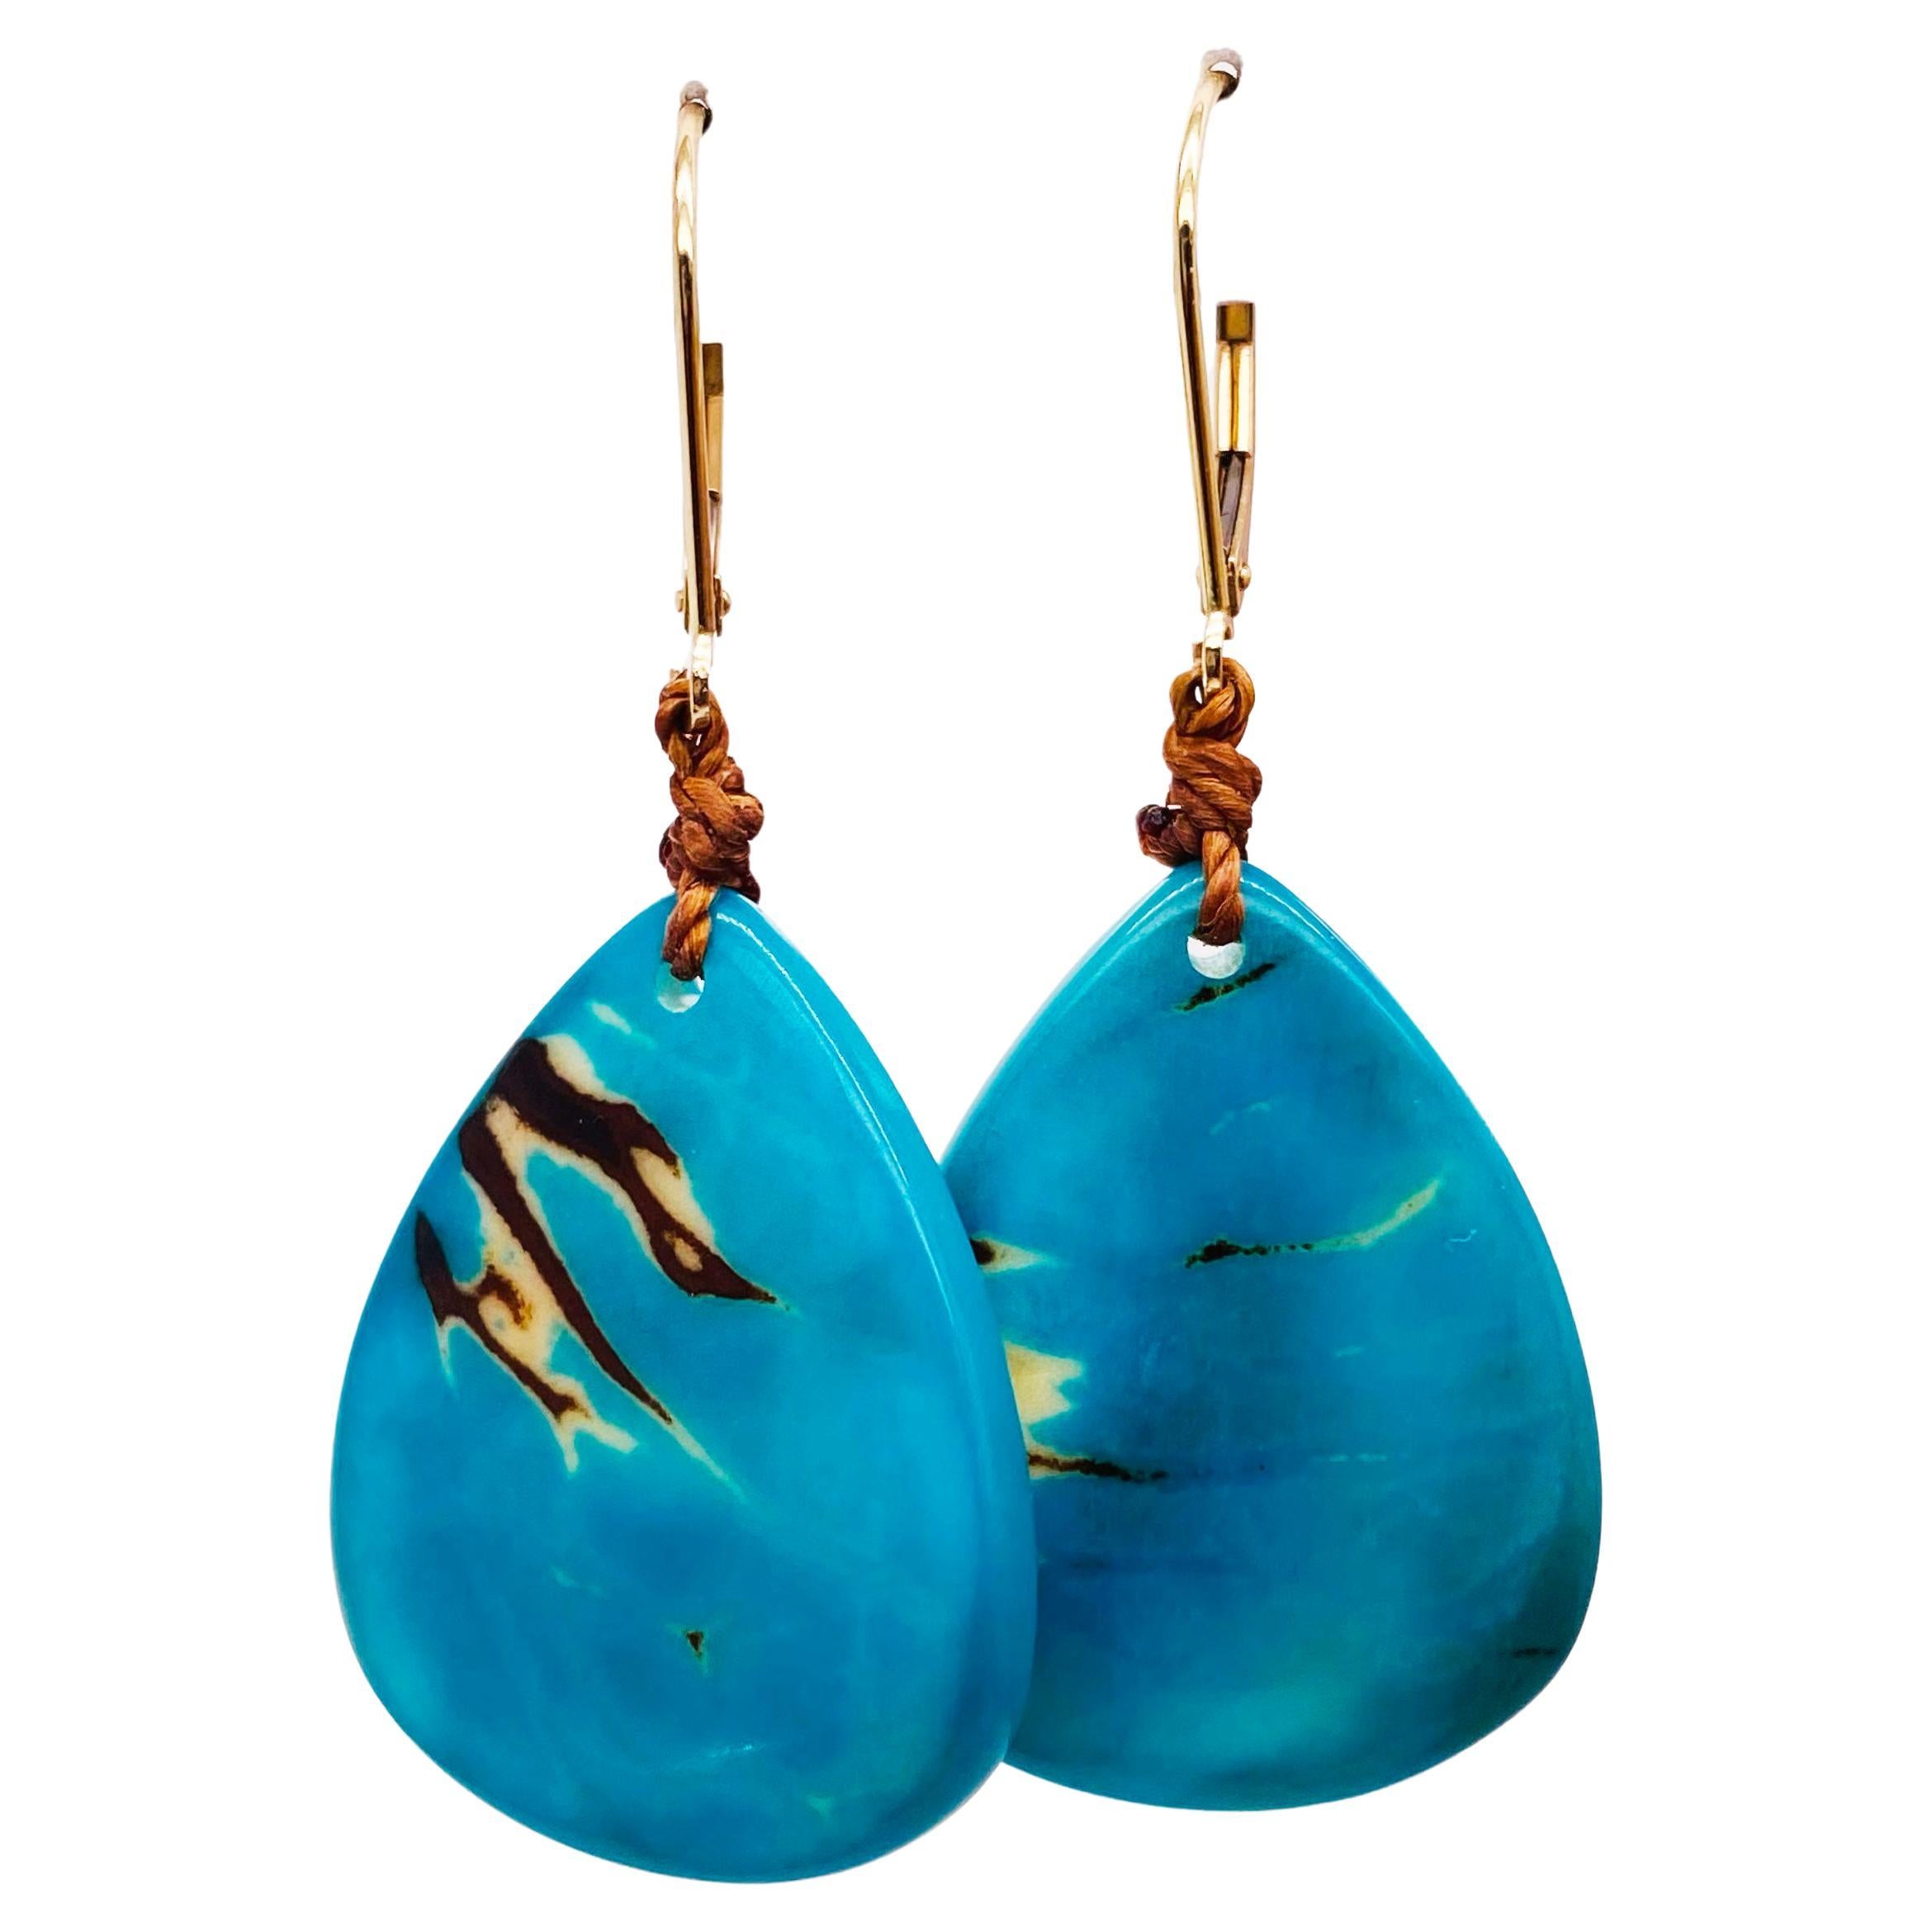 Palm Tree Nut Dangle Earrings in 14k Yellow Gold, Turquoise Nut from Rainforest For Sale